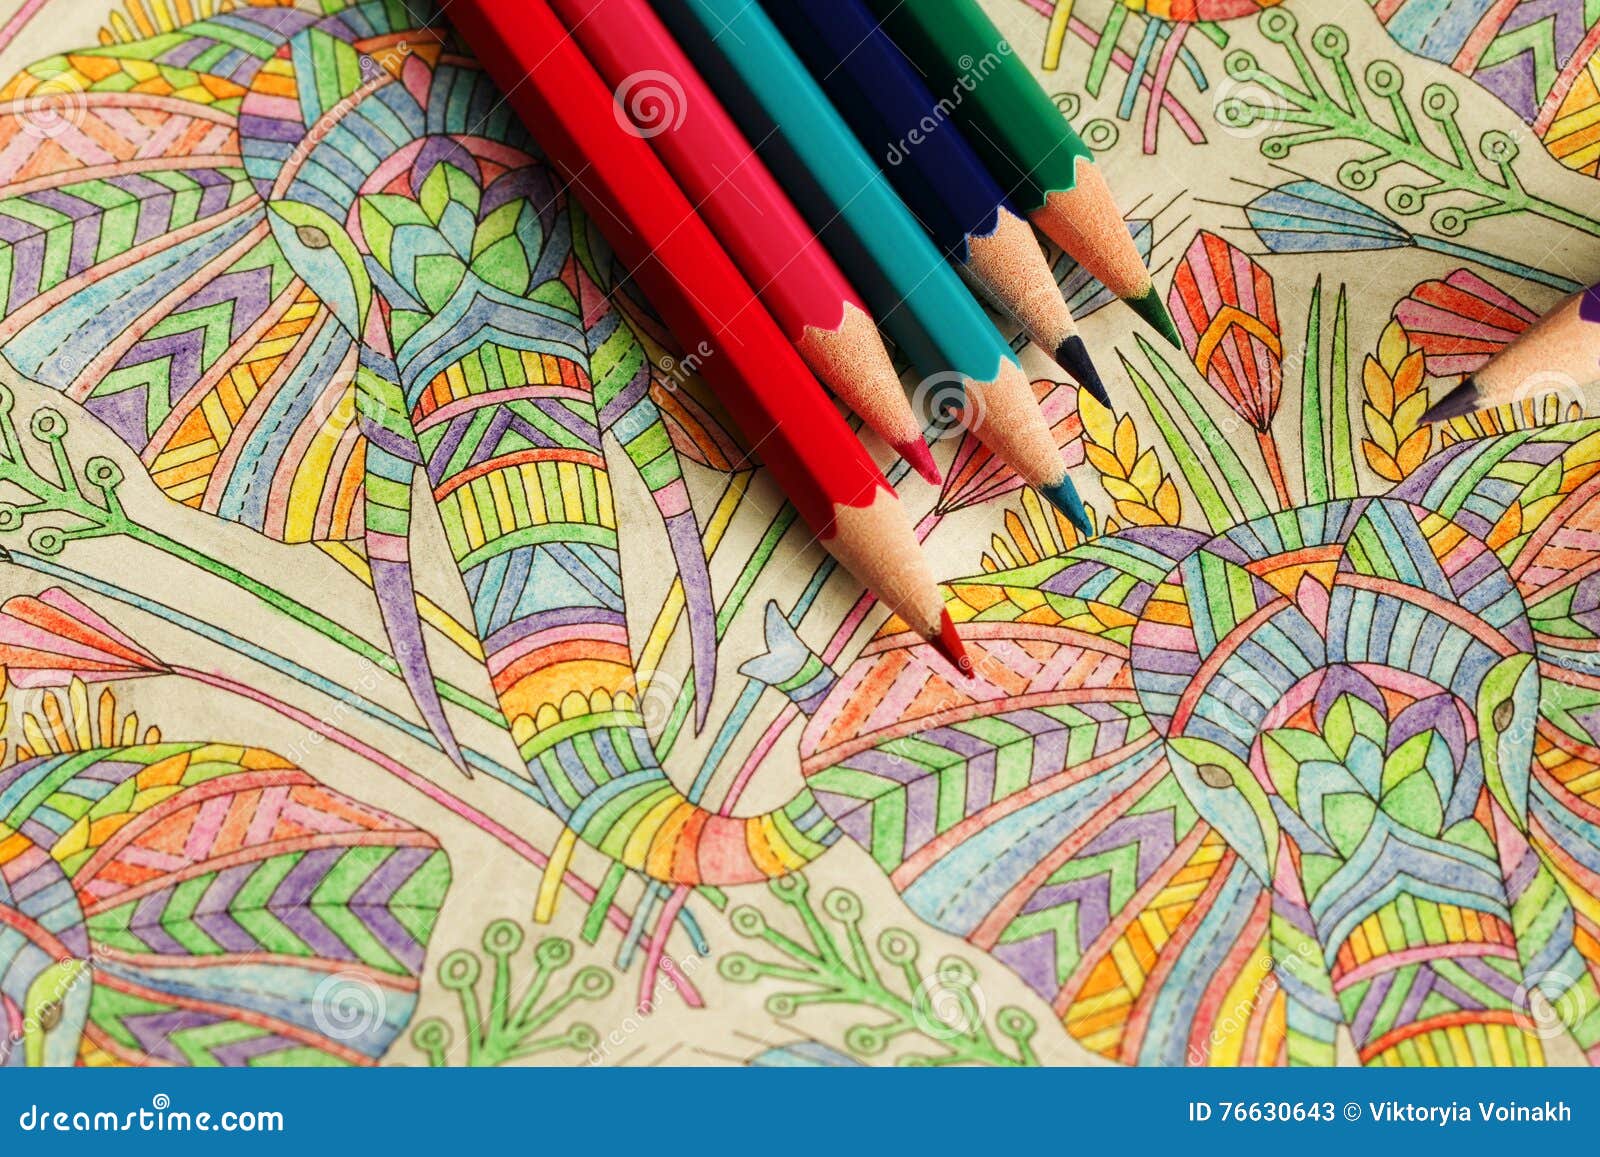 https://thumbs.dreamstime.com/z/coloring-book-pencils-adults-hobby-76630643.jpg